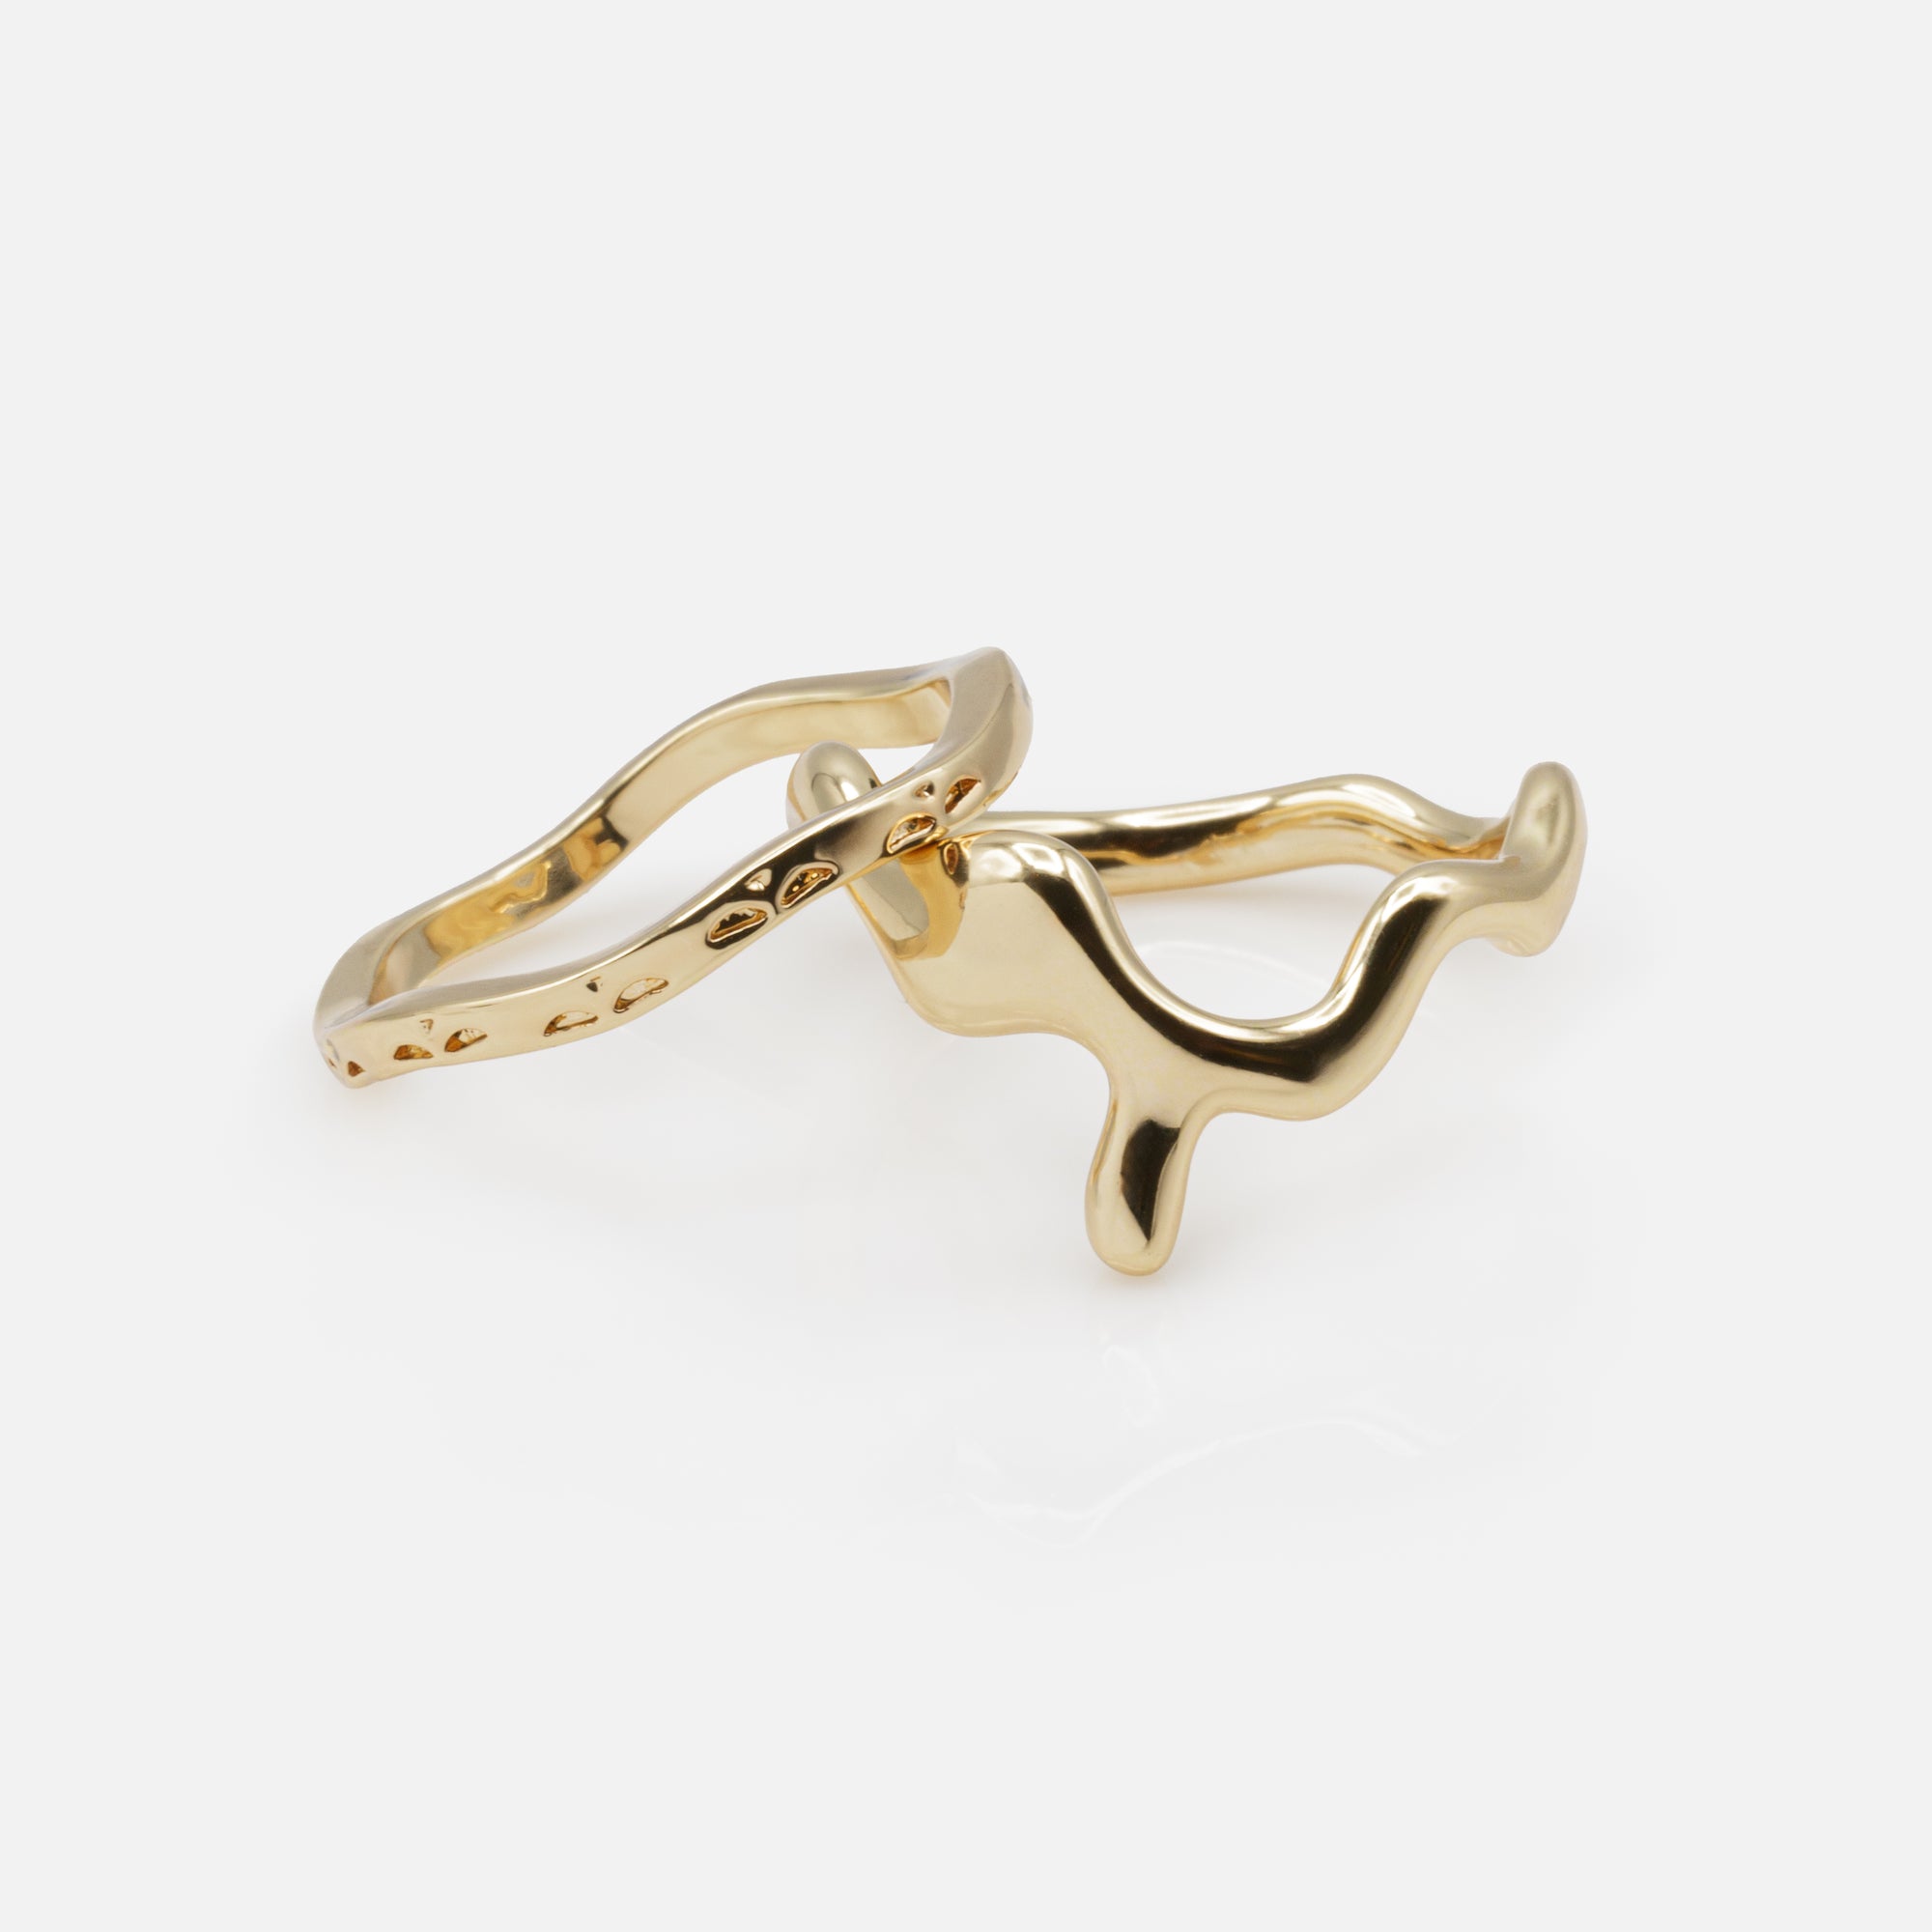 Duo of golden rings with irregular curves and delicate patterns